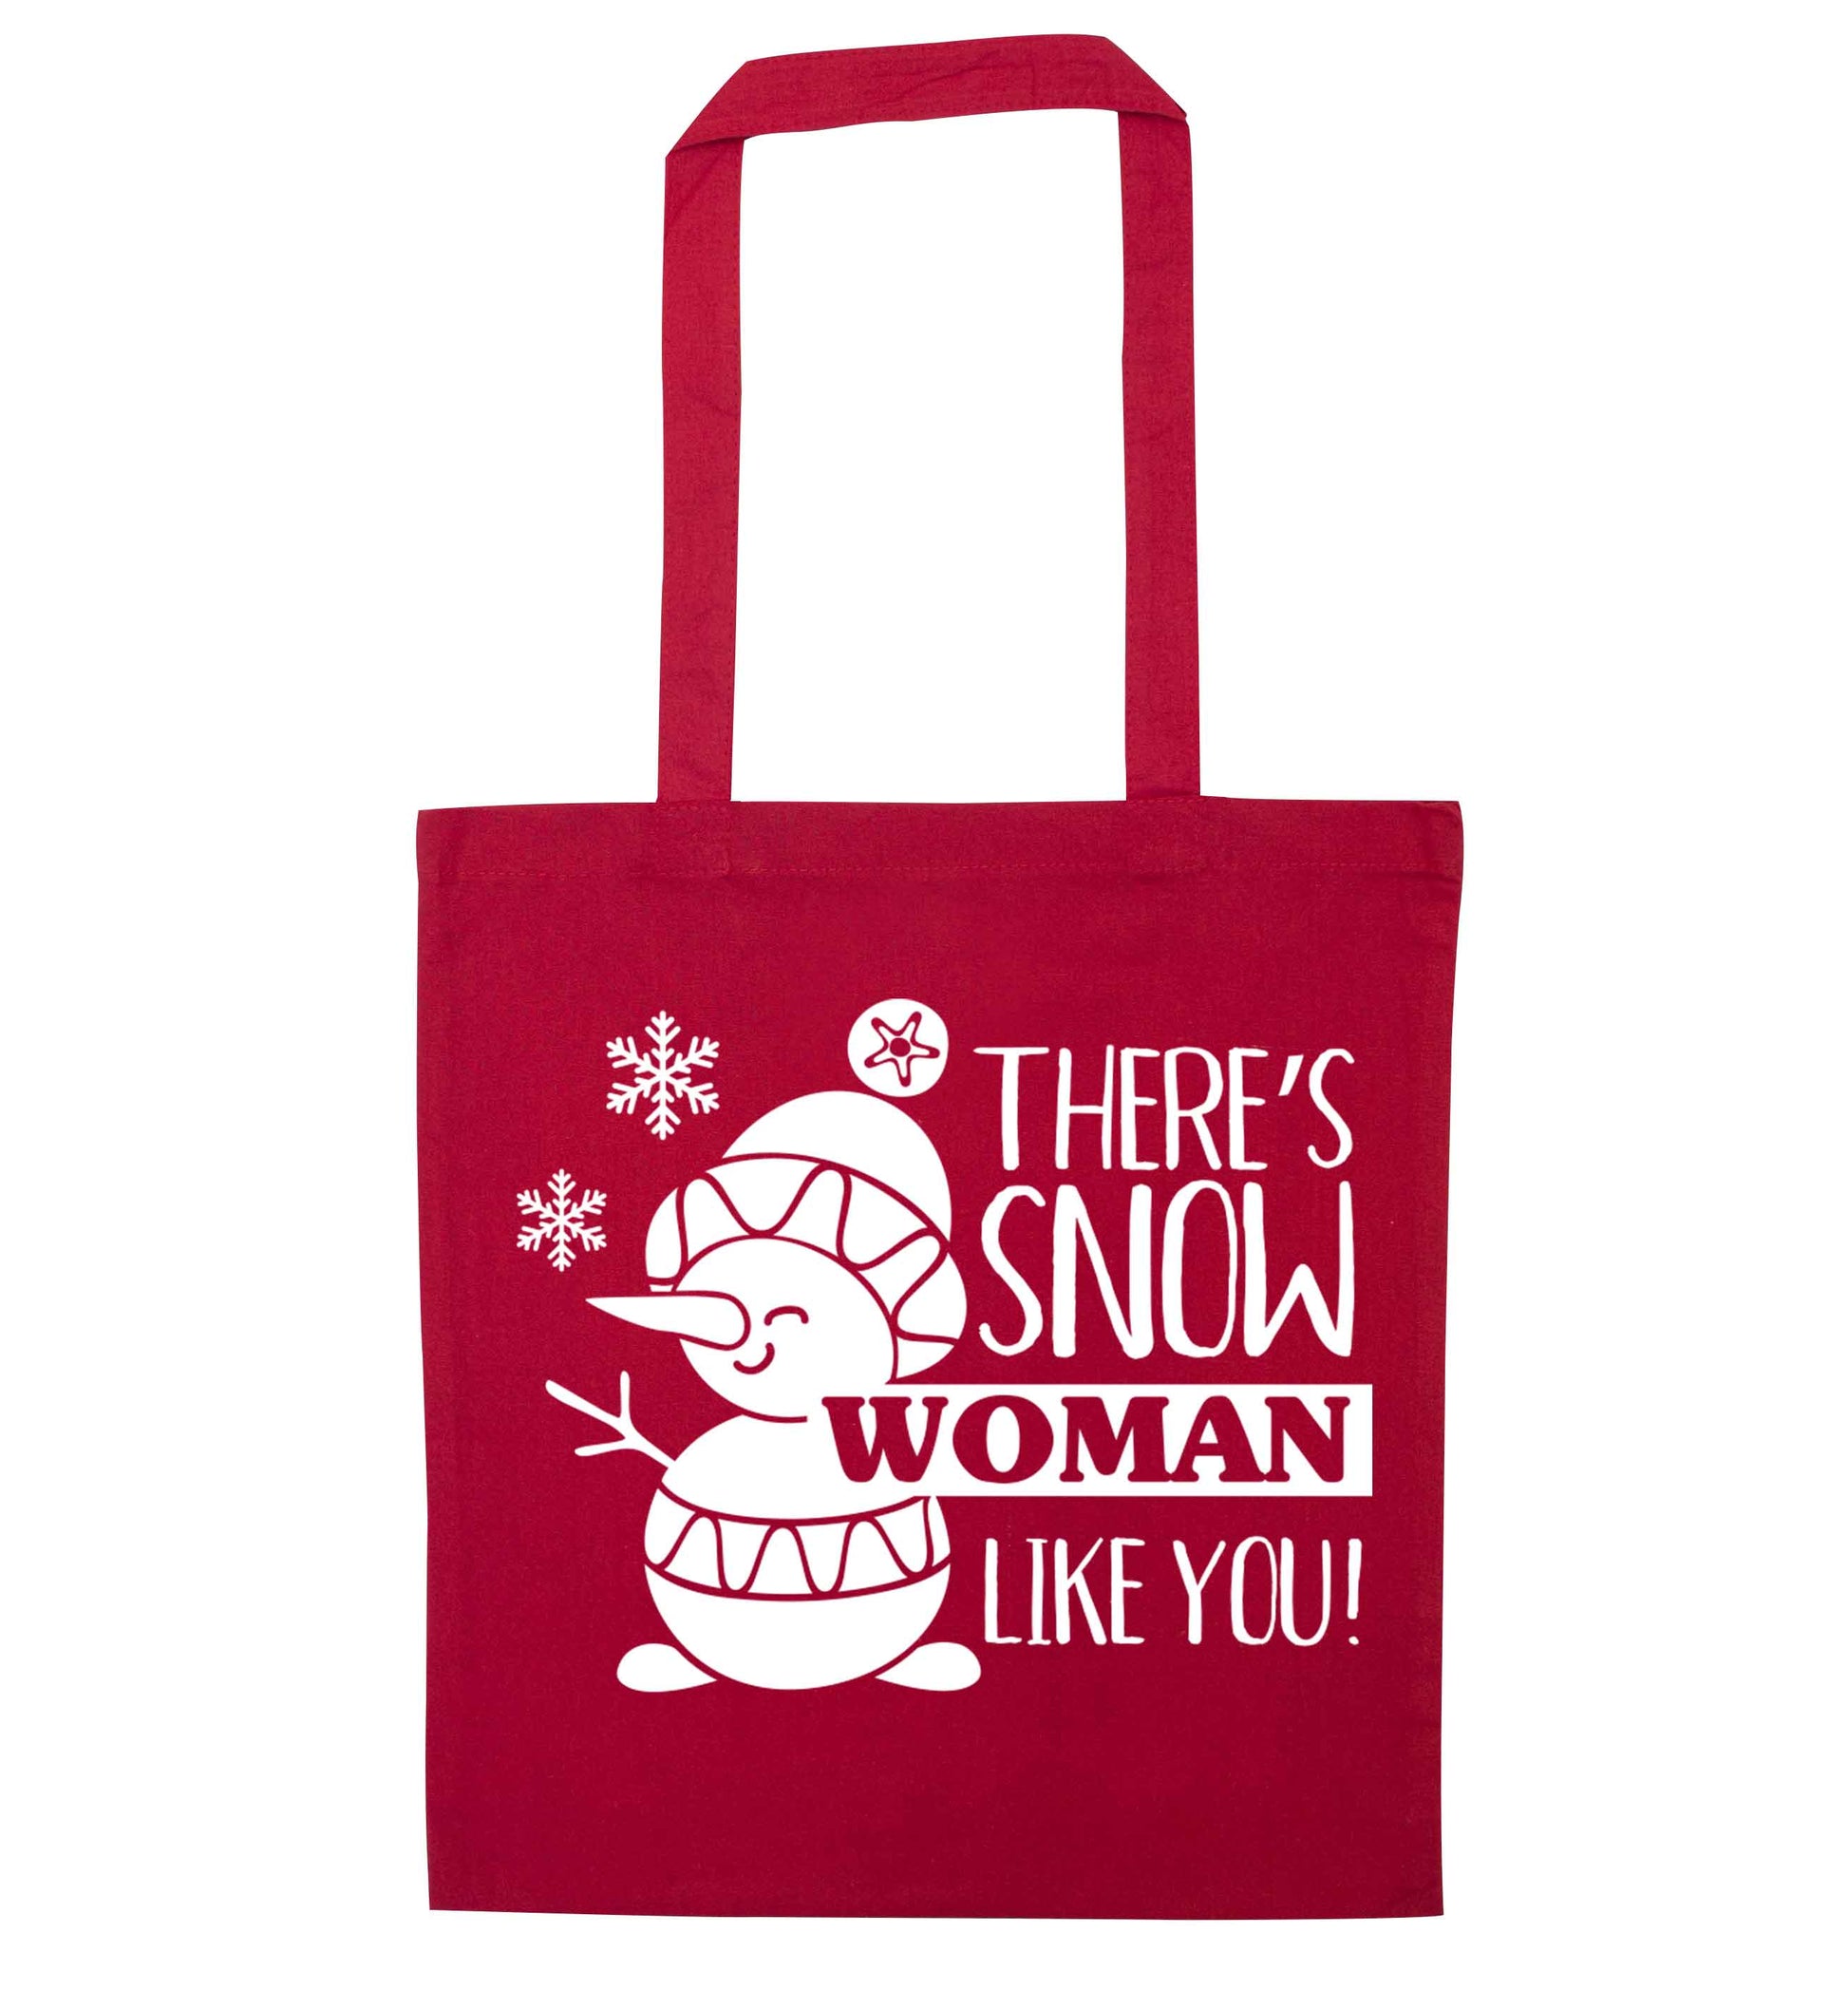 There's snow woman like you red tote bag